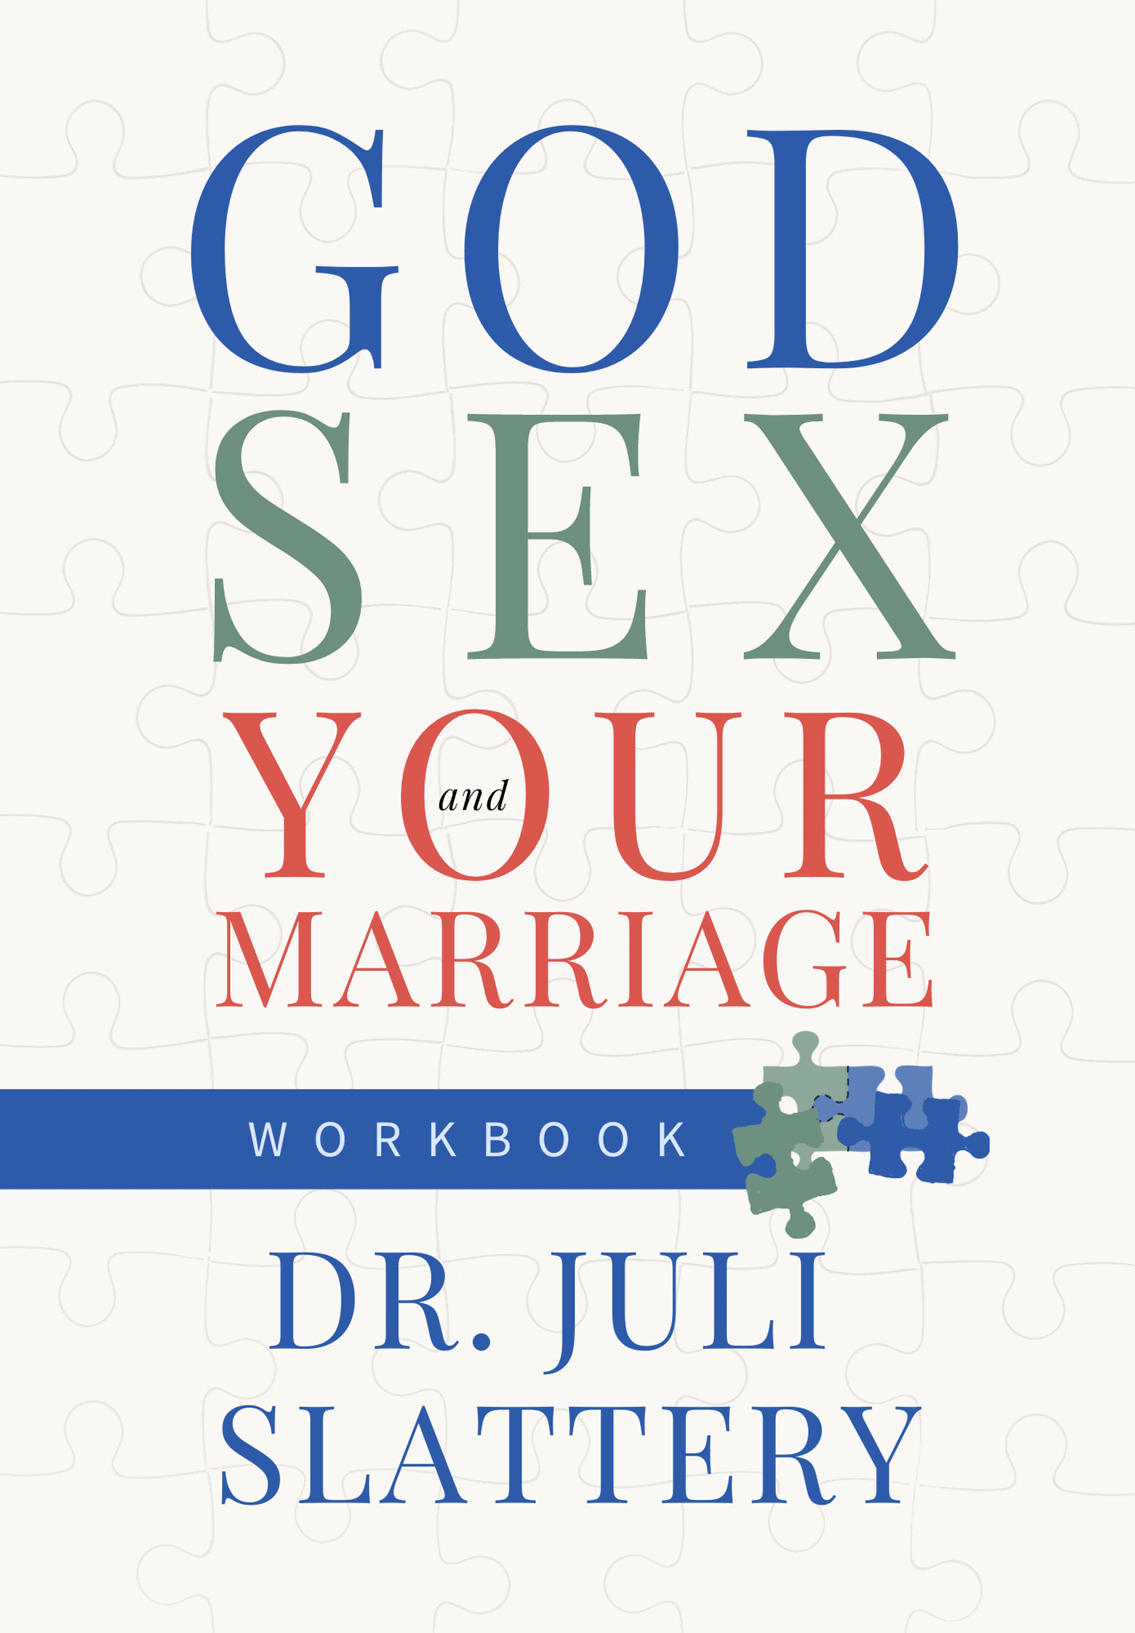 married christian sex guide online